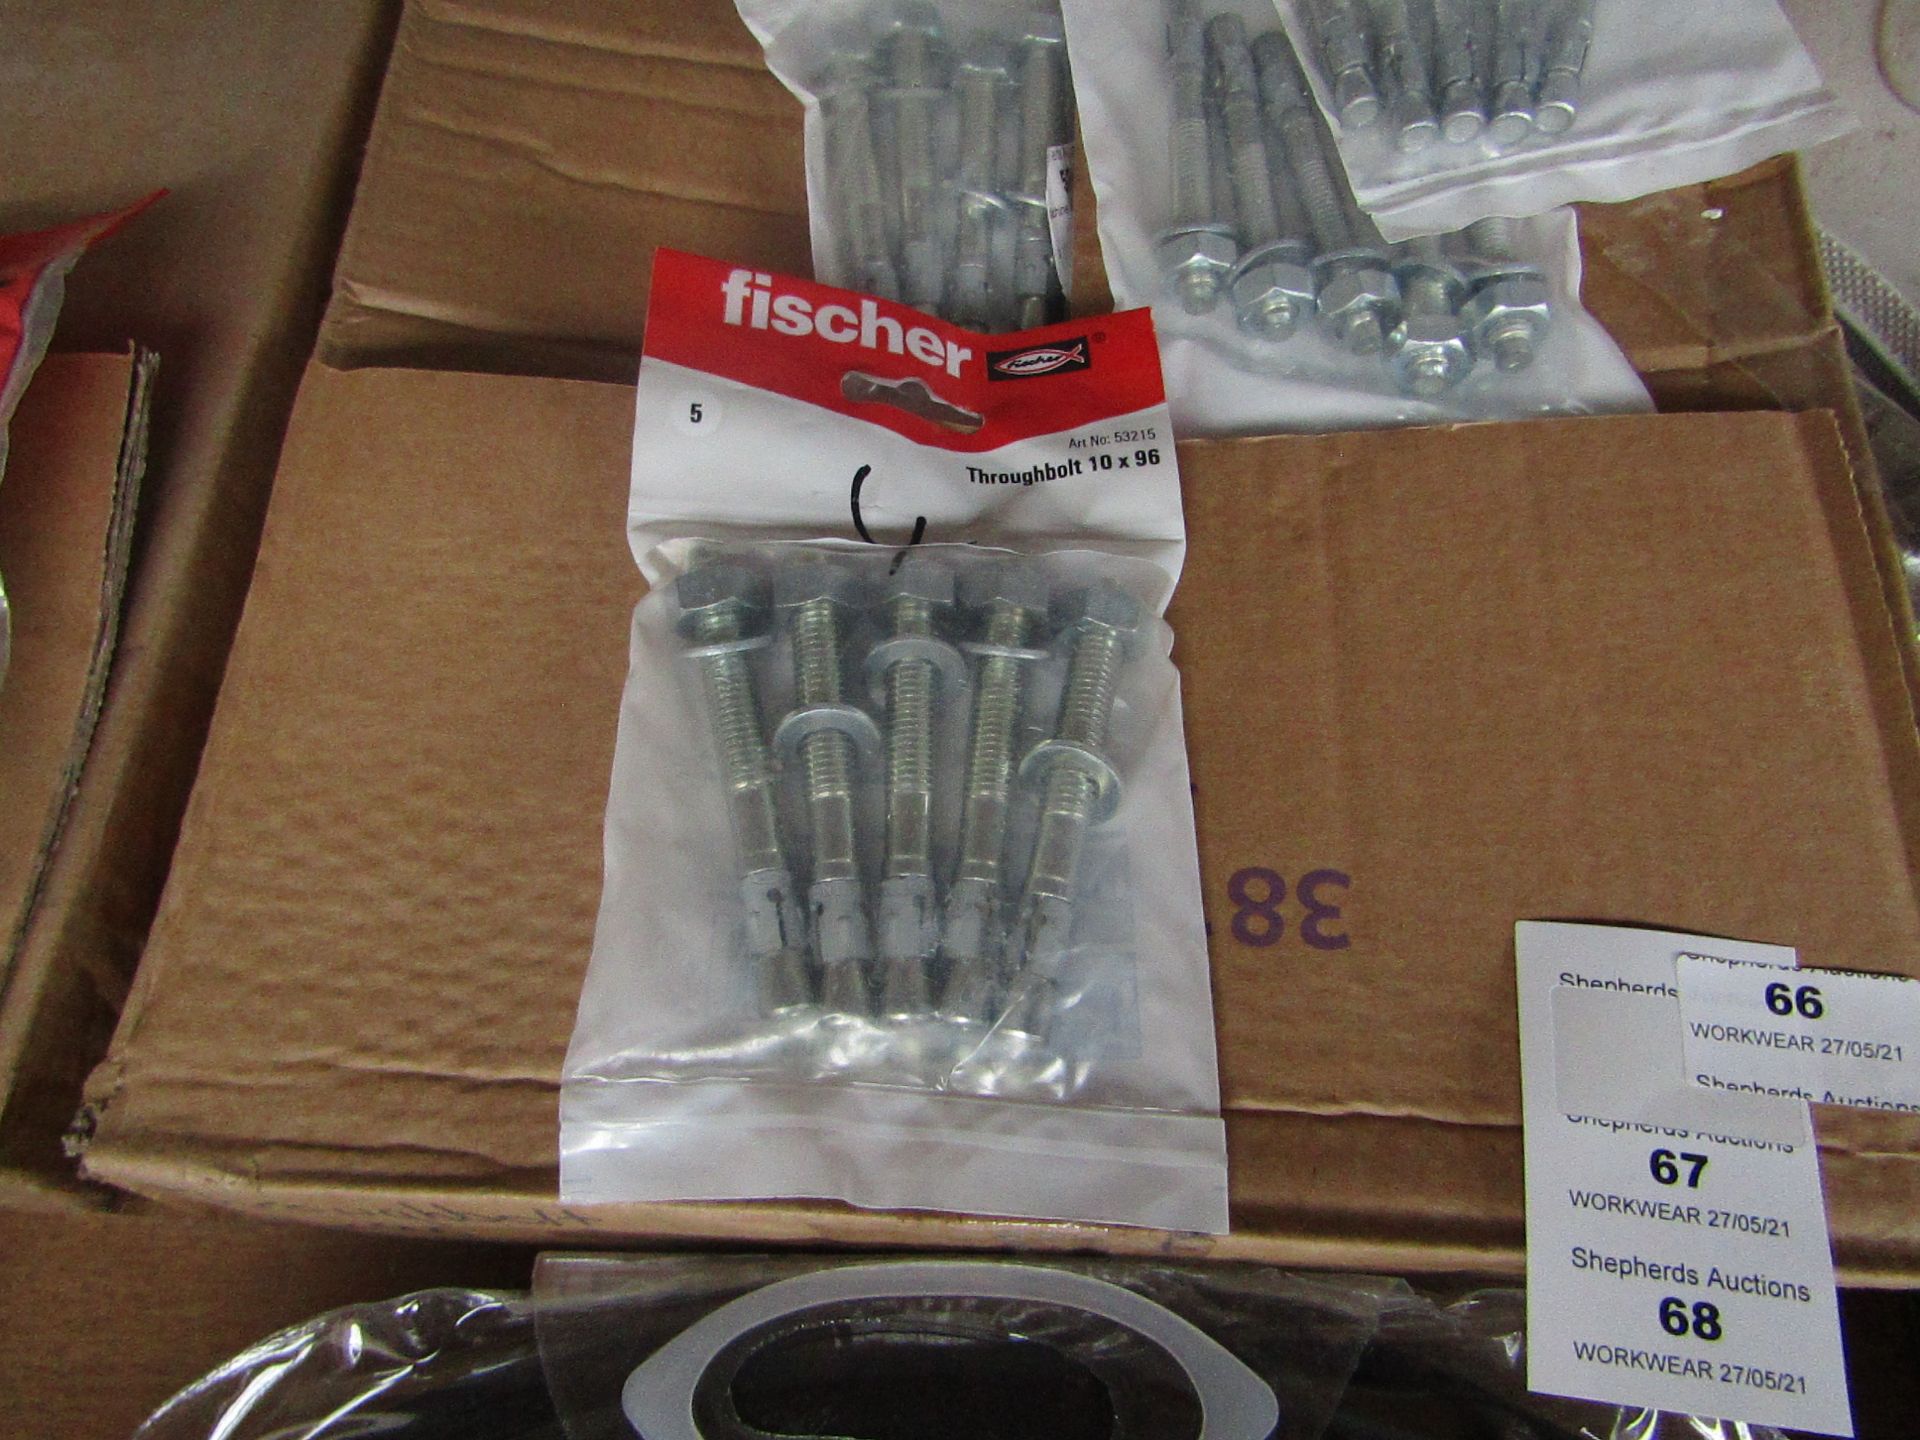 6x Packs of Fischer throughbolts 10 x 96, new and packaged.